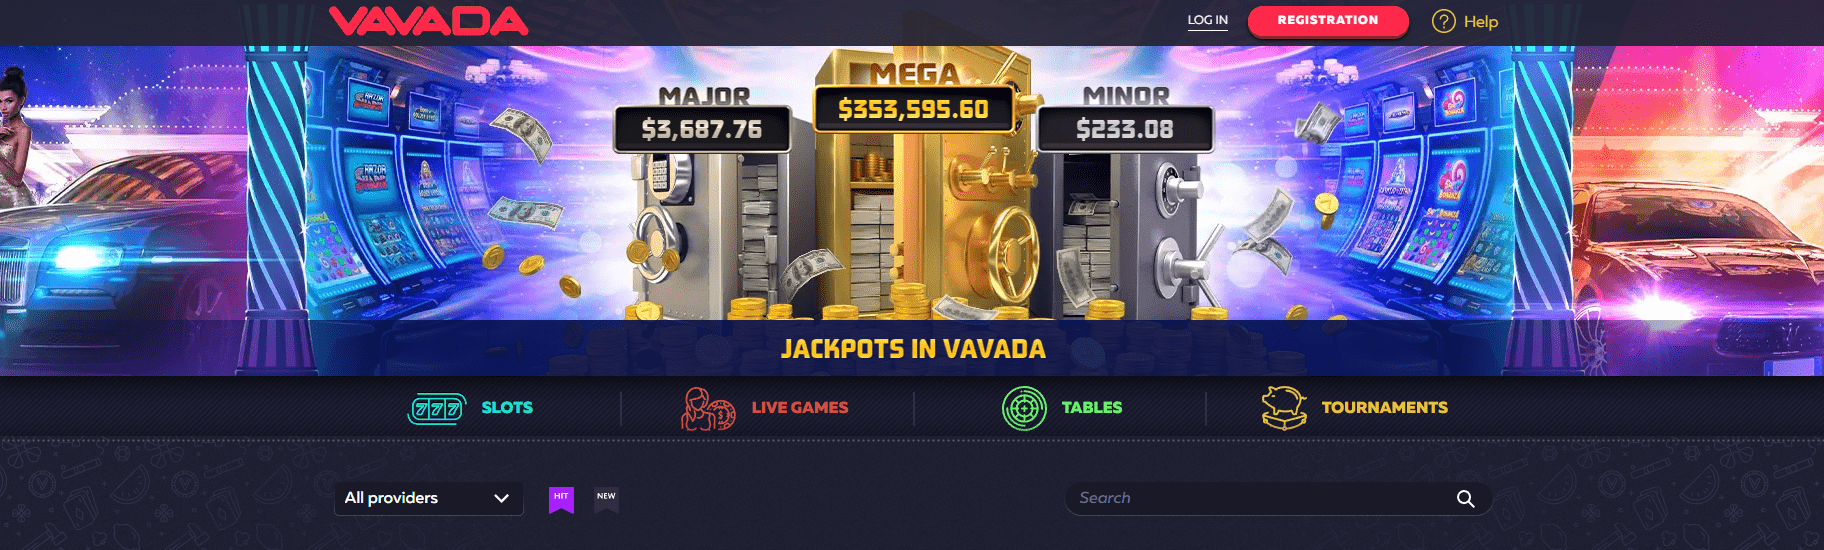 Twin Spin slot machines for real money in Vavada